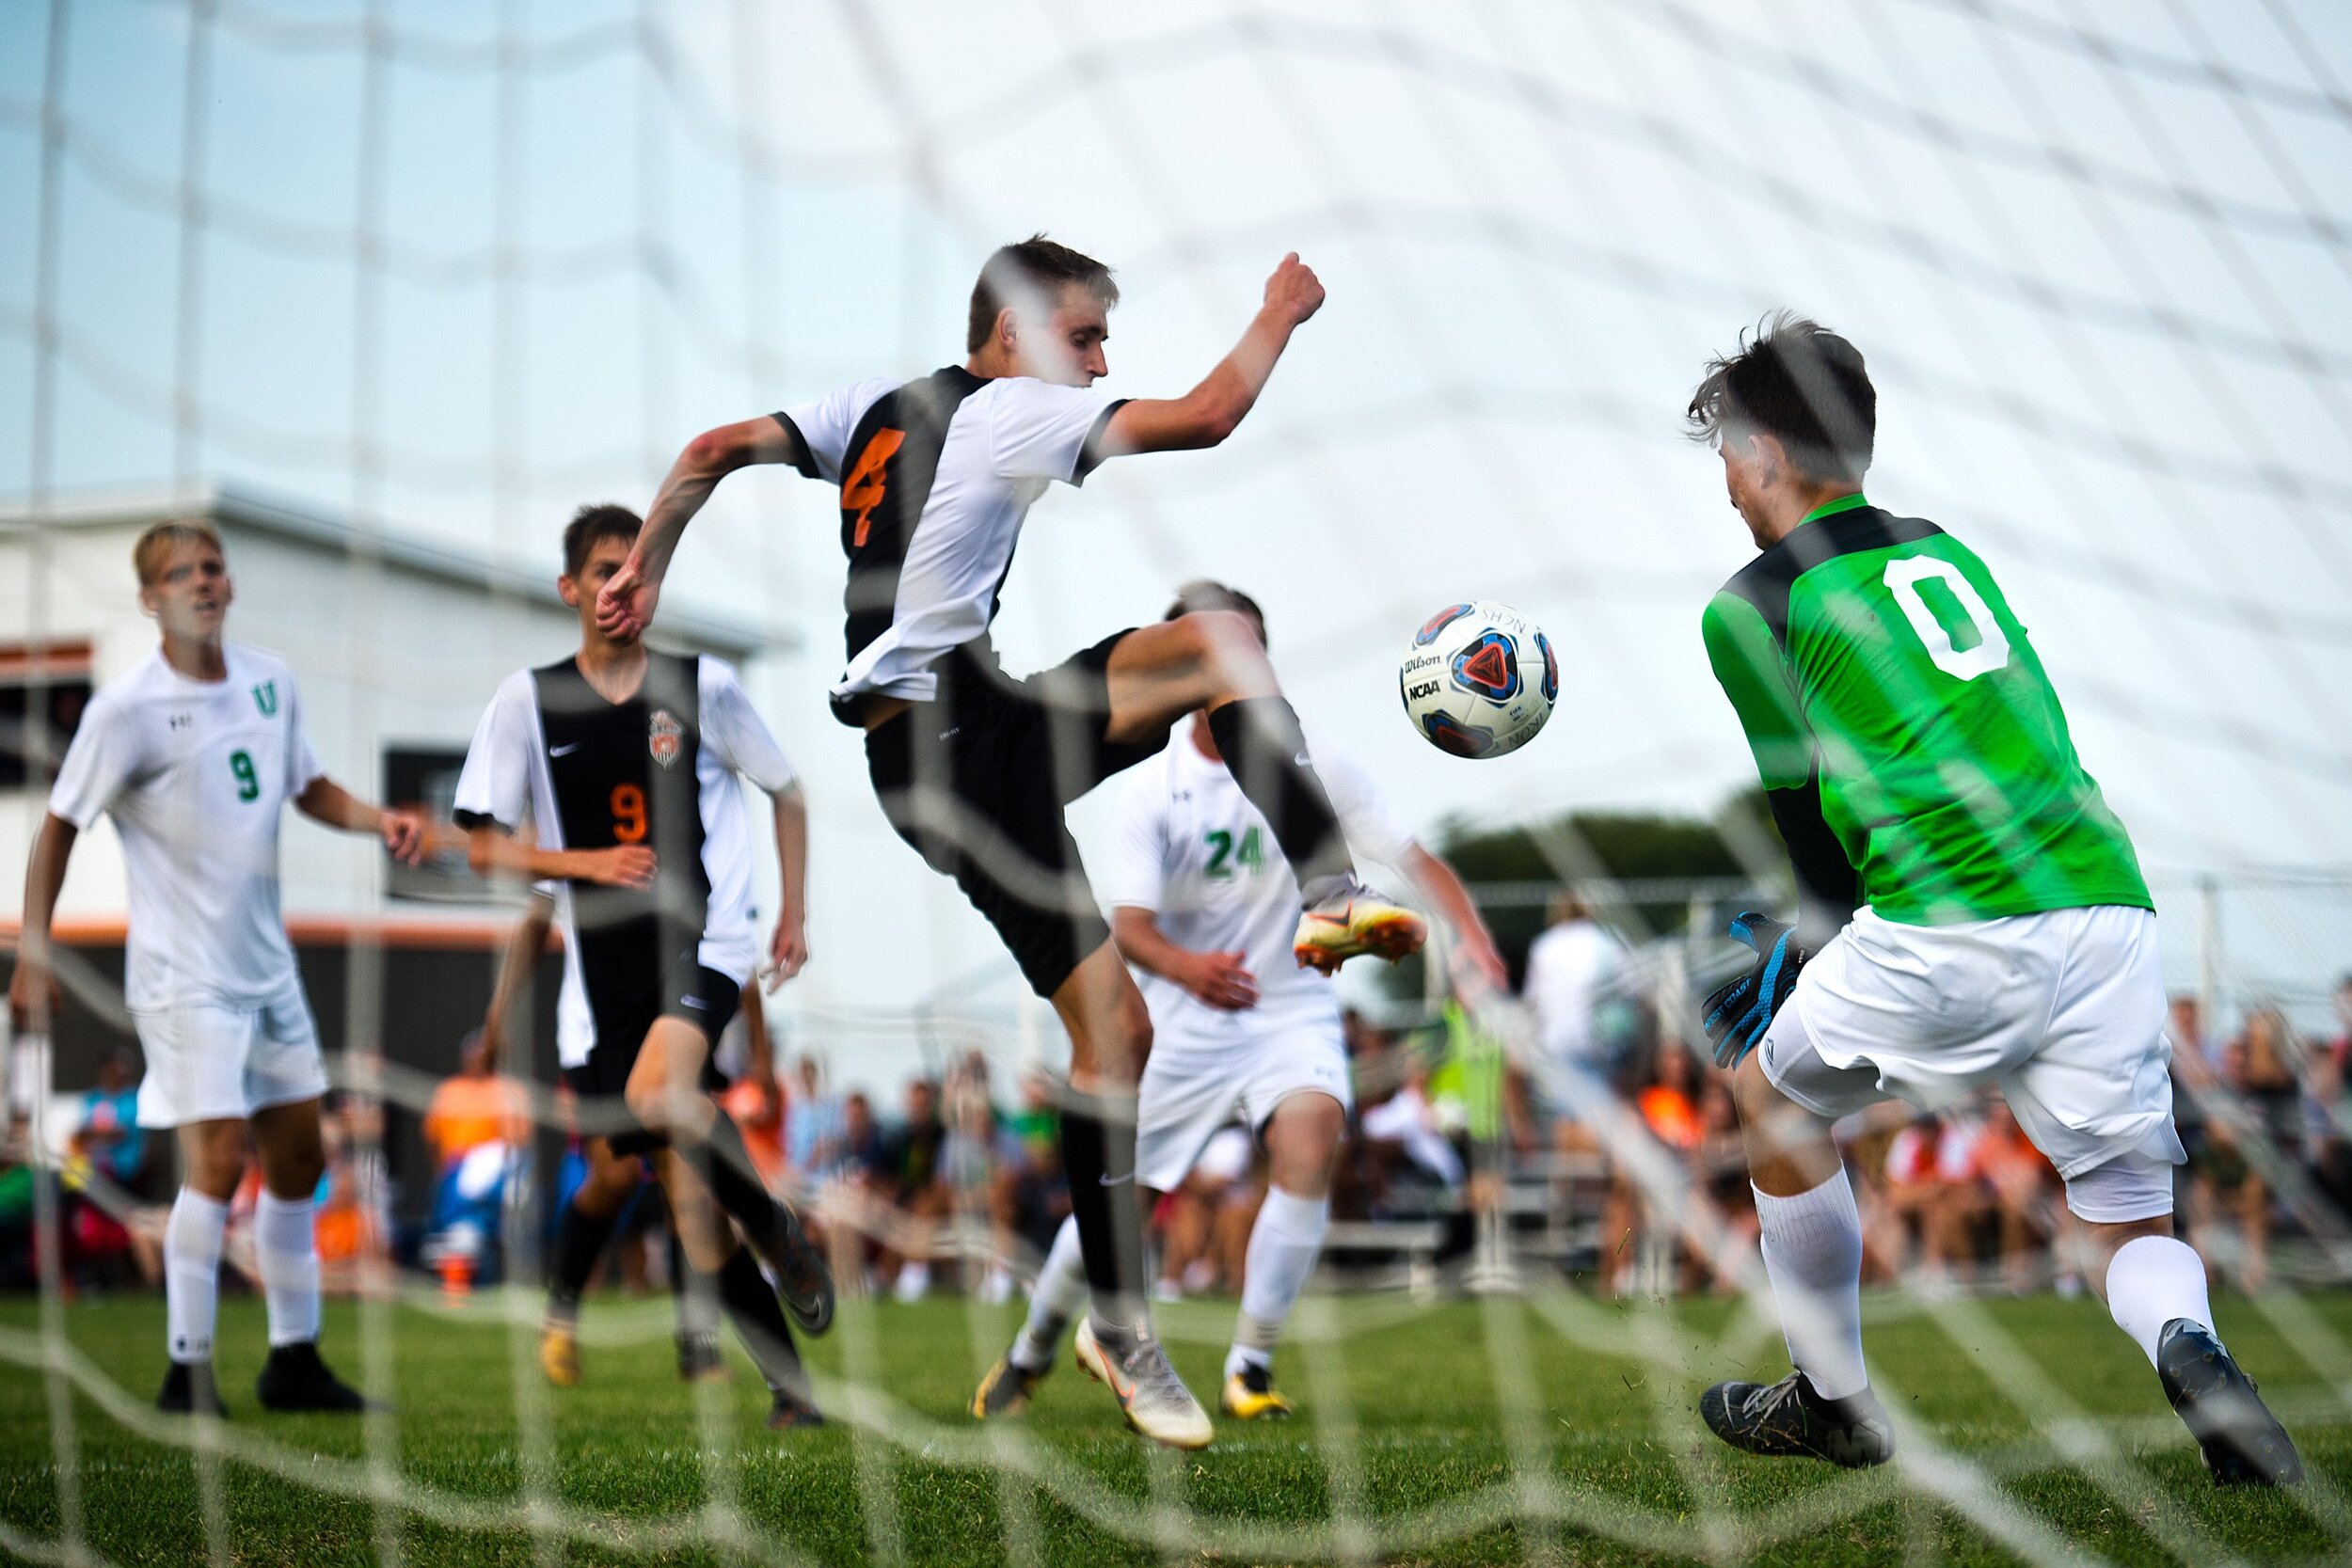  Normal Community High School forward Michael Reibling looks to score on University High School goalkeeper MacCallan Conklin during their game in the 22nd annual Intercity Boys Soccer Tournament on Thursday, Aug. 30, 2018, in Normal, Illinois. Reibli